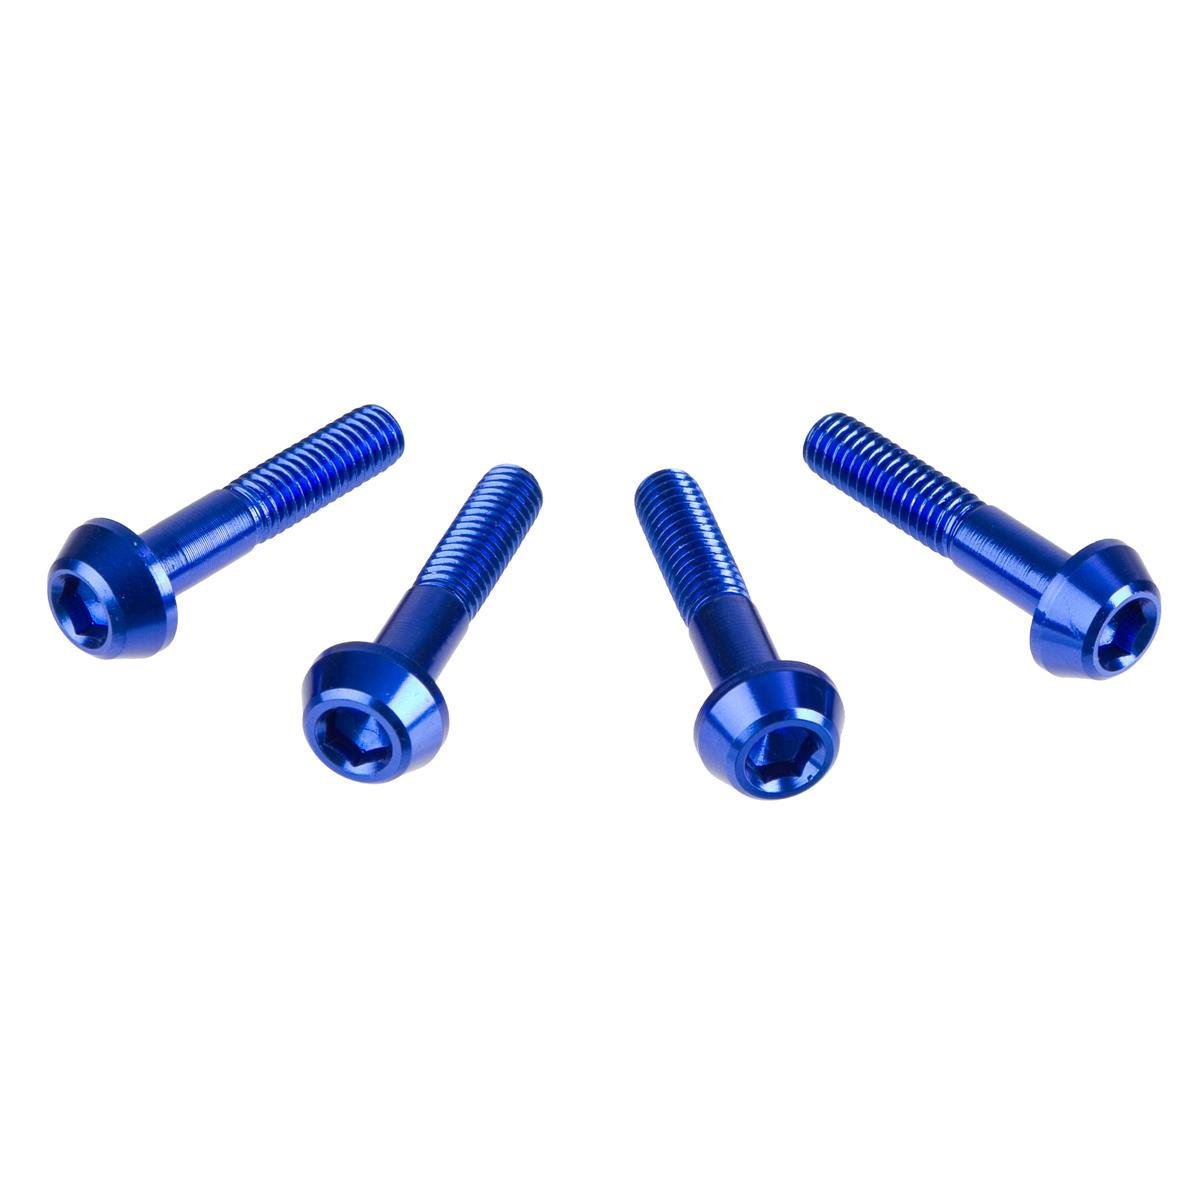 DRC Inner Hex Bolts  M6 x 30 mm, Blue, Pack of 4